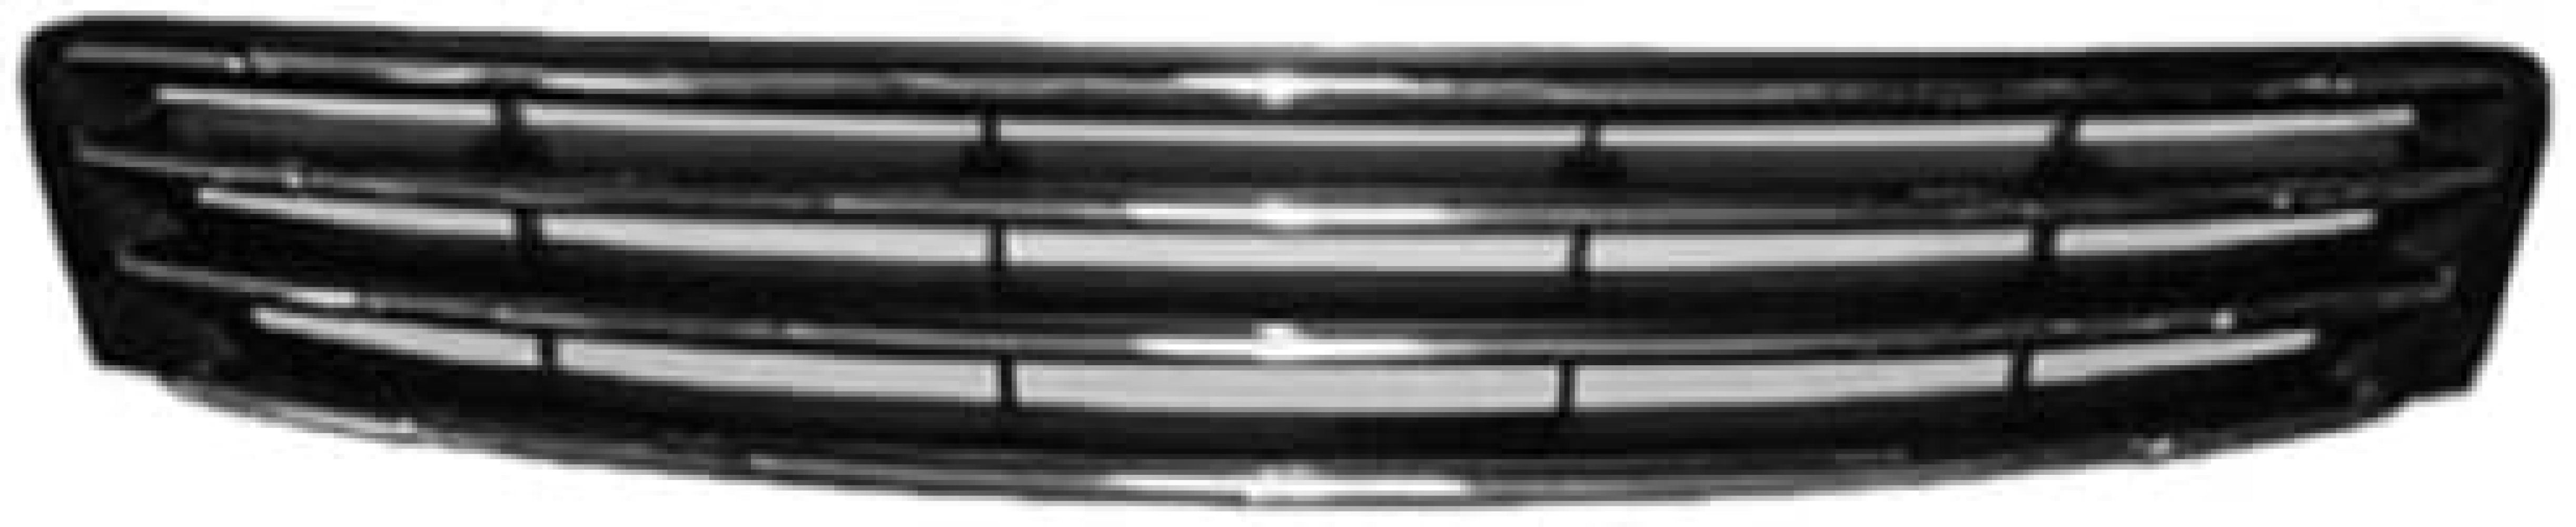 Partslink CH1038135 OE Replacement Bumper Grille Insert DODGE CHALLENGER 2007-2010 